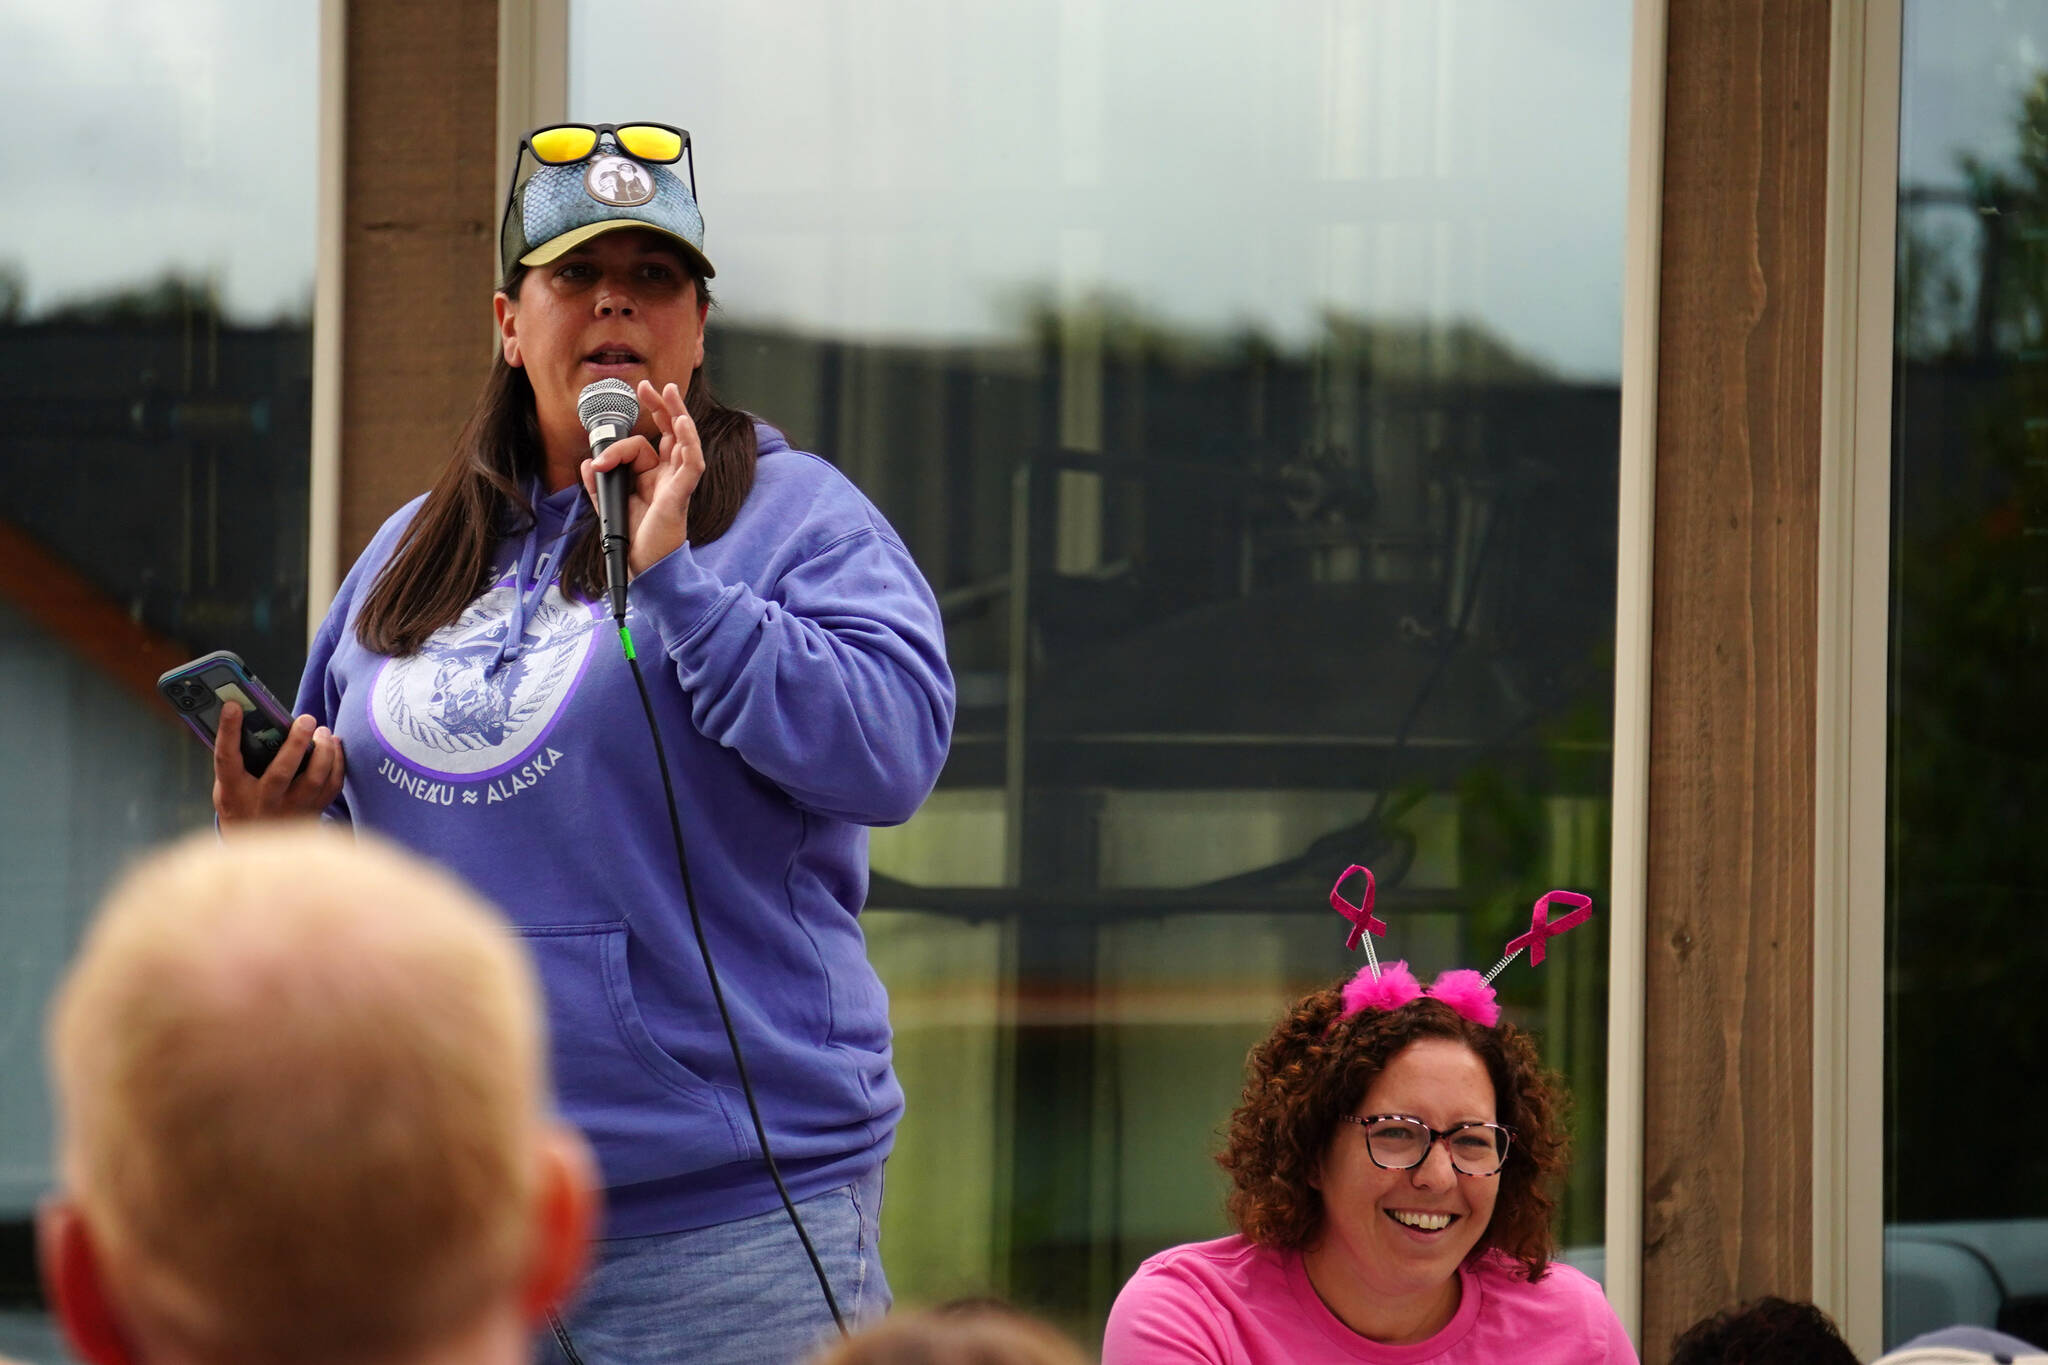 Nicole Murphy and Alana Martin speak before the start of the Brewery to Bathroom .5K at Kenai River Brewing in Soldotna, Alaska, on Sunday, Aug. 13, 2023. (Jake Dye/Peninsula Clarion)